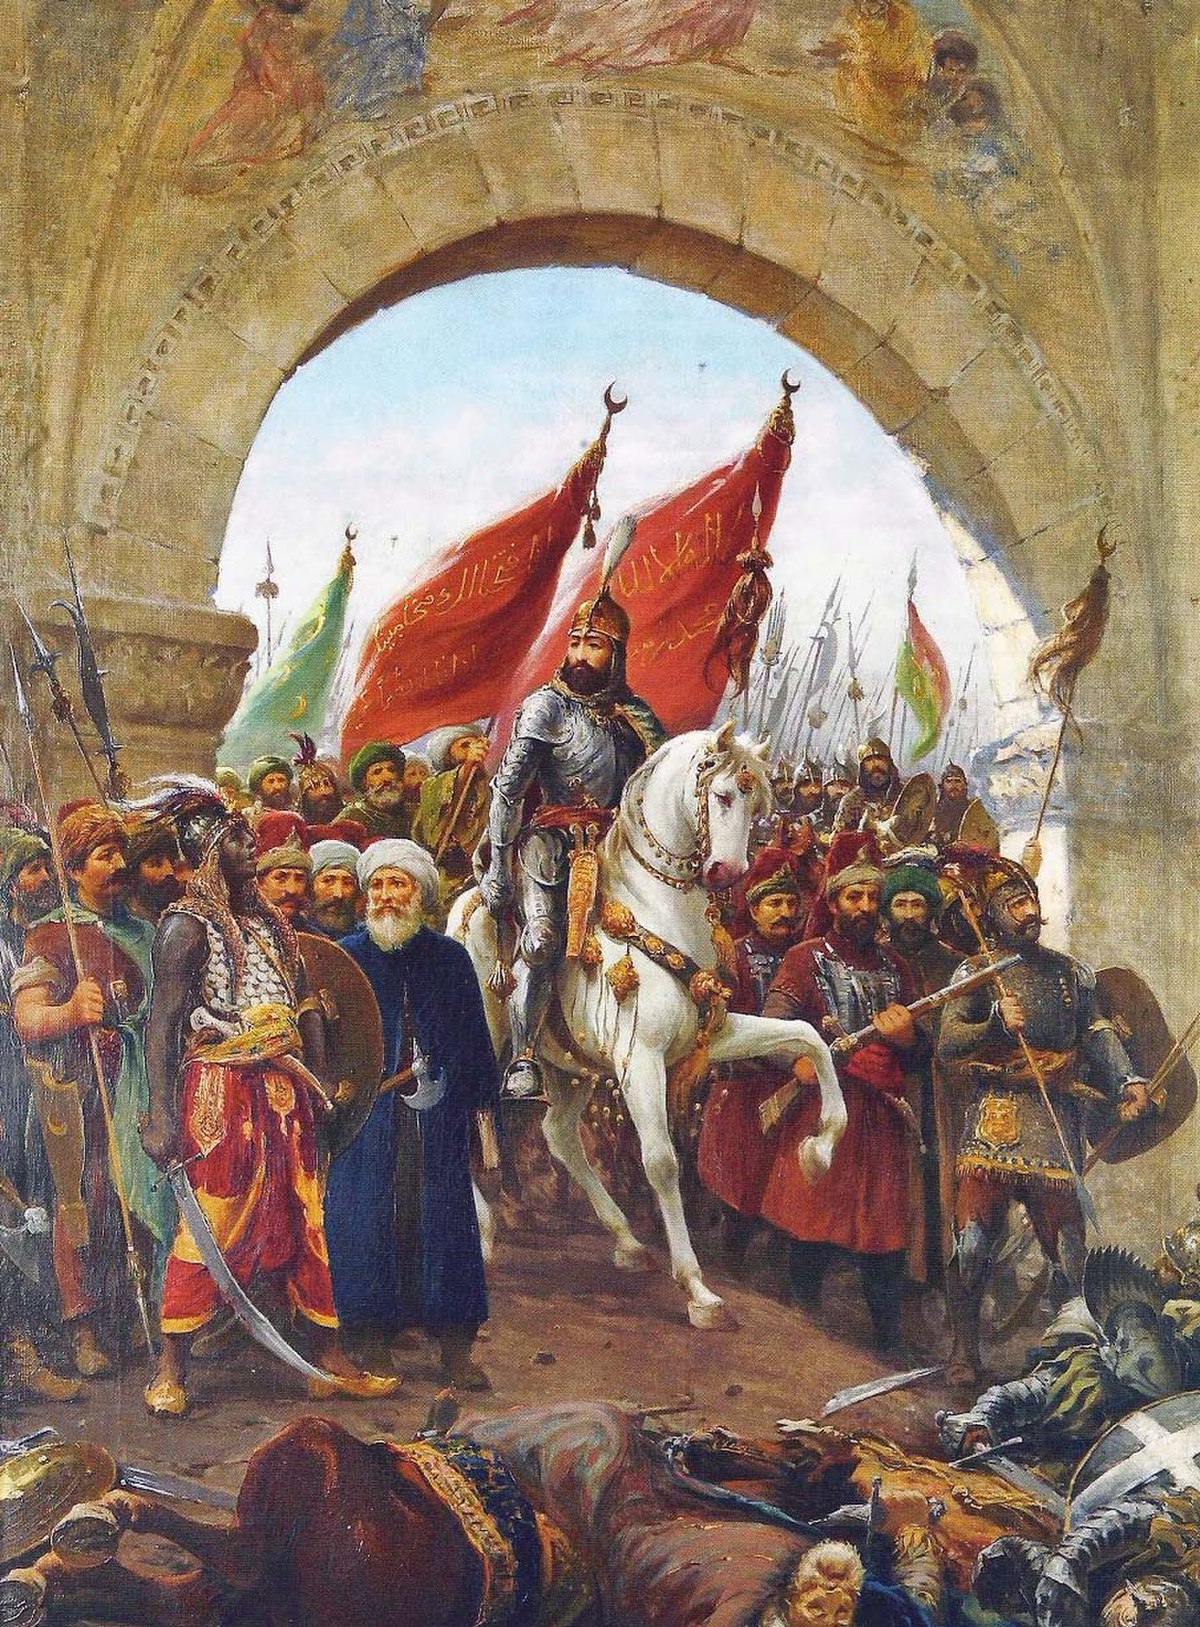 Mehmed 's Conquests